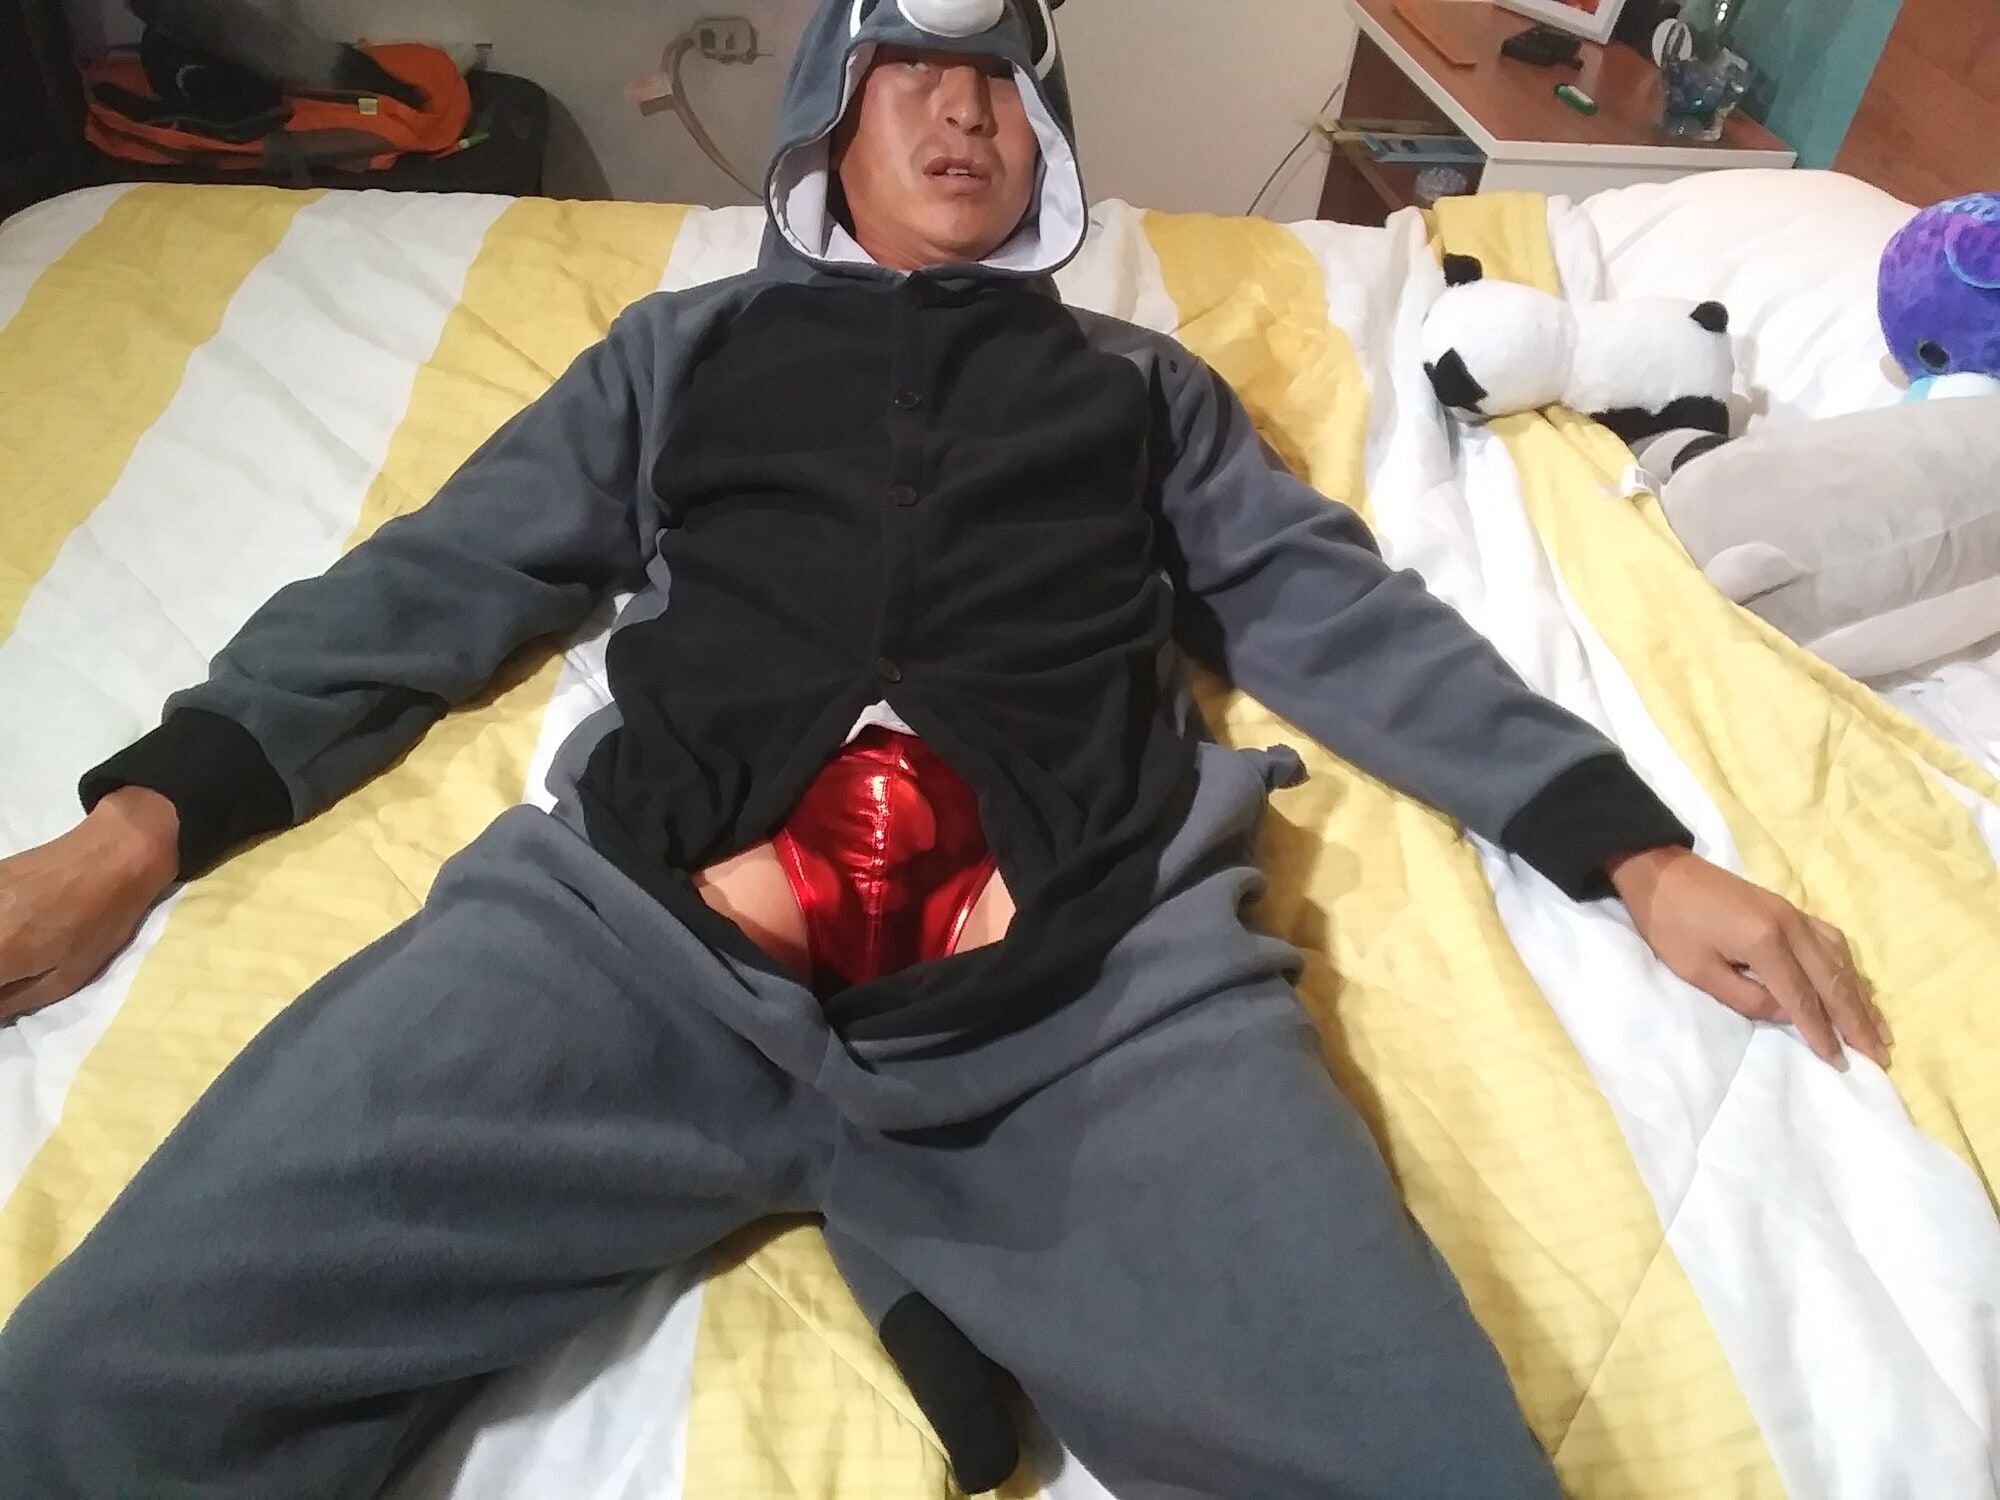 Hot asian boy wearing furry onesies and shiny undies #6